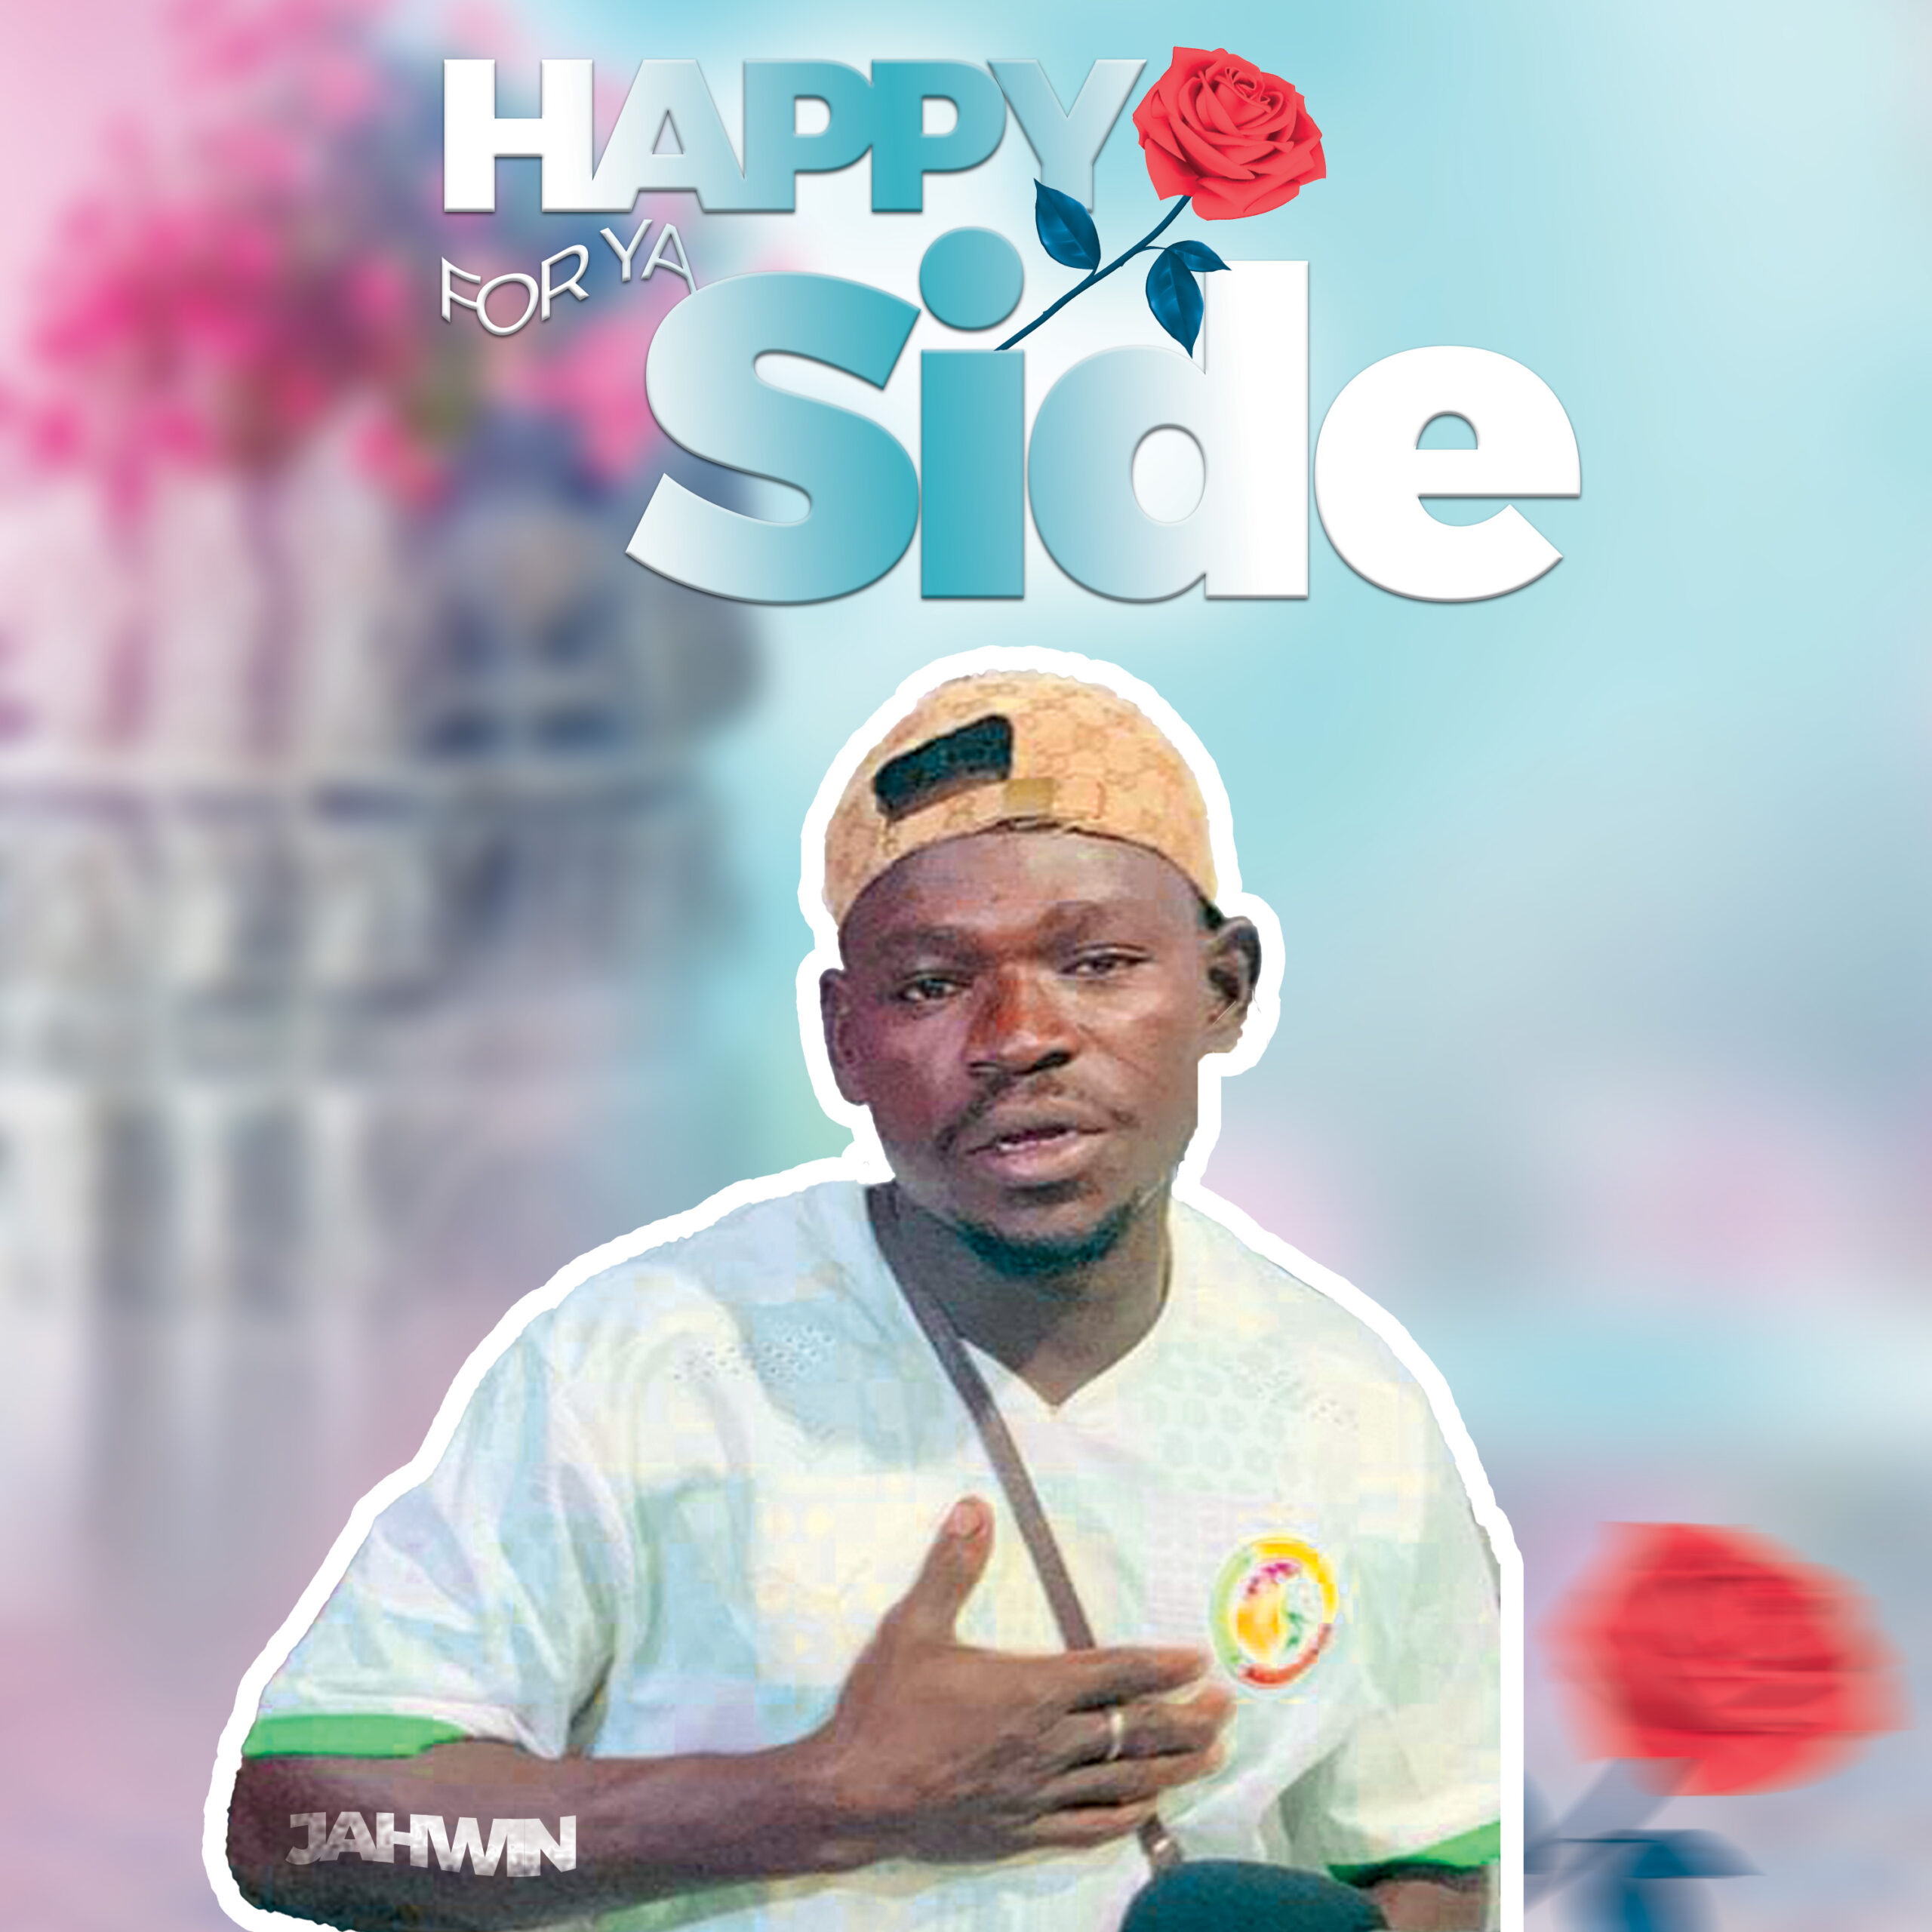 Out now :Jahwin _Happy for ya side